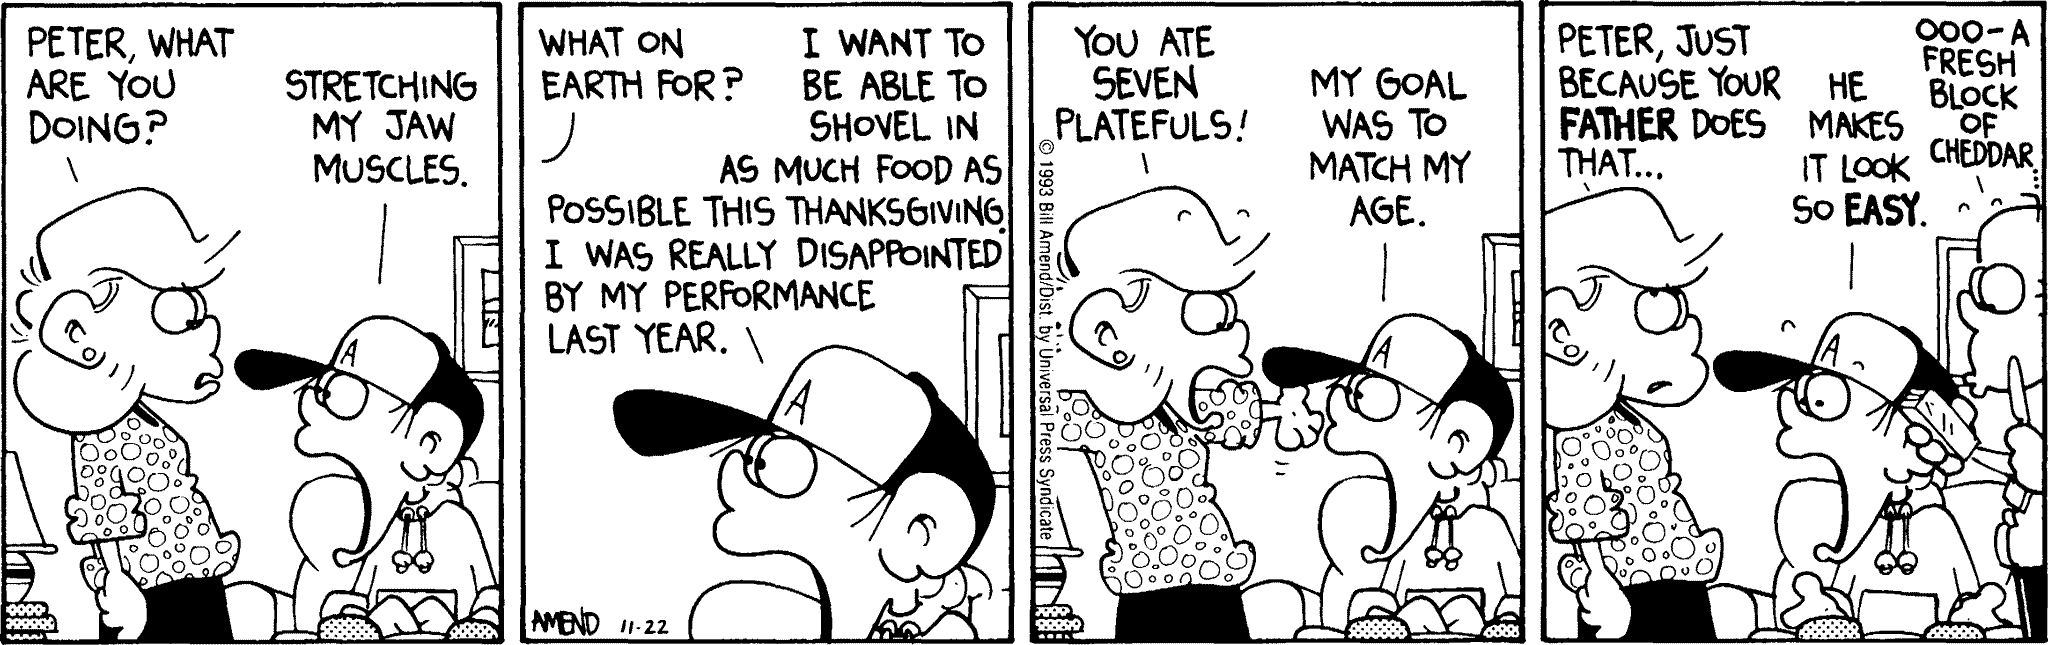 Thanksgiving Comics - FoxTrot comic strip by Bill Amend - Published November 22, 1993 - Transcript: Andy Fox: Peter, what are you doing? Peter Fox: Stretching my jaw muscles. Andy Fox: What on earth for? Peter Fox: I want to be able to shovel in as much food as possible this Thanksgiving. I was really disappointed by my performance last year. Andy Fox: You ate seven platefuls! Peter Fox: My goal was to match my age. Andy Fox: Peter, just because your father does that... Peter Fox: He makes it look so easy. Roger Fox: Ooo- a fresh block of cheddar...